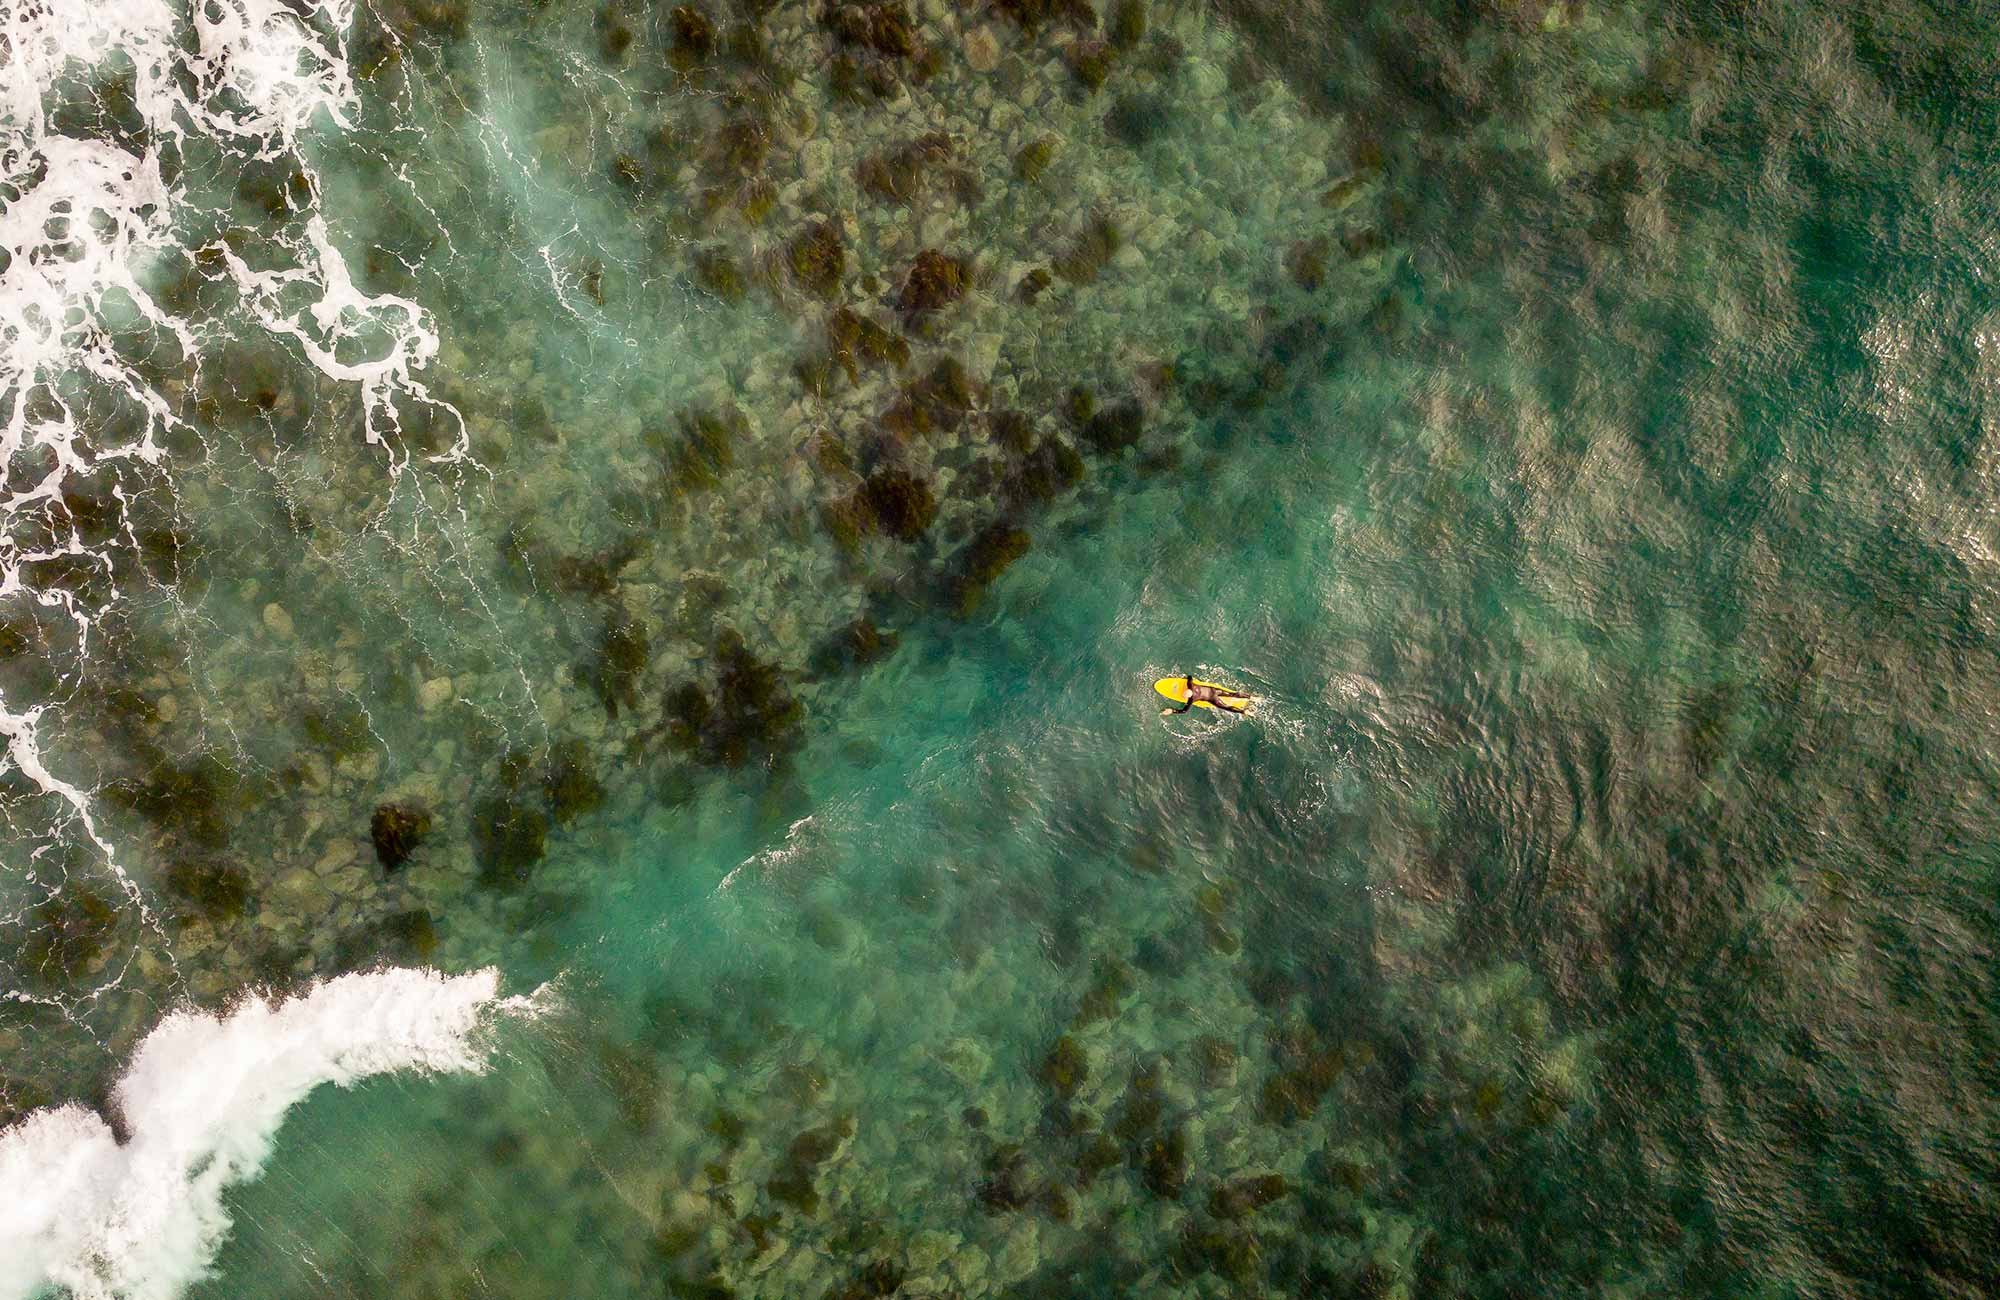 Aerial view of surfer in the ocean near Saltwater Creek campground. Photo: J Spencer/OEH